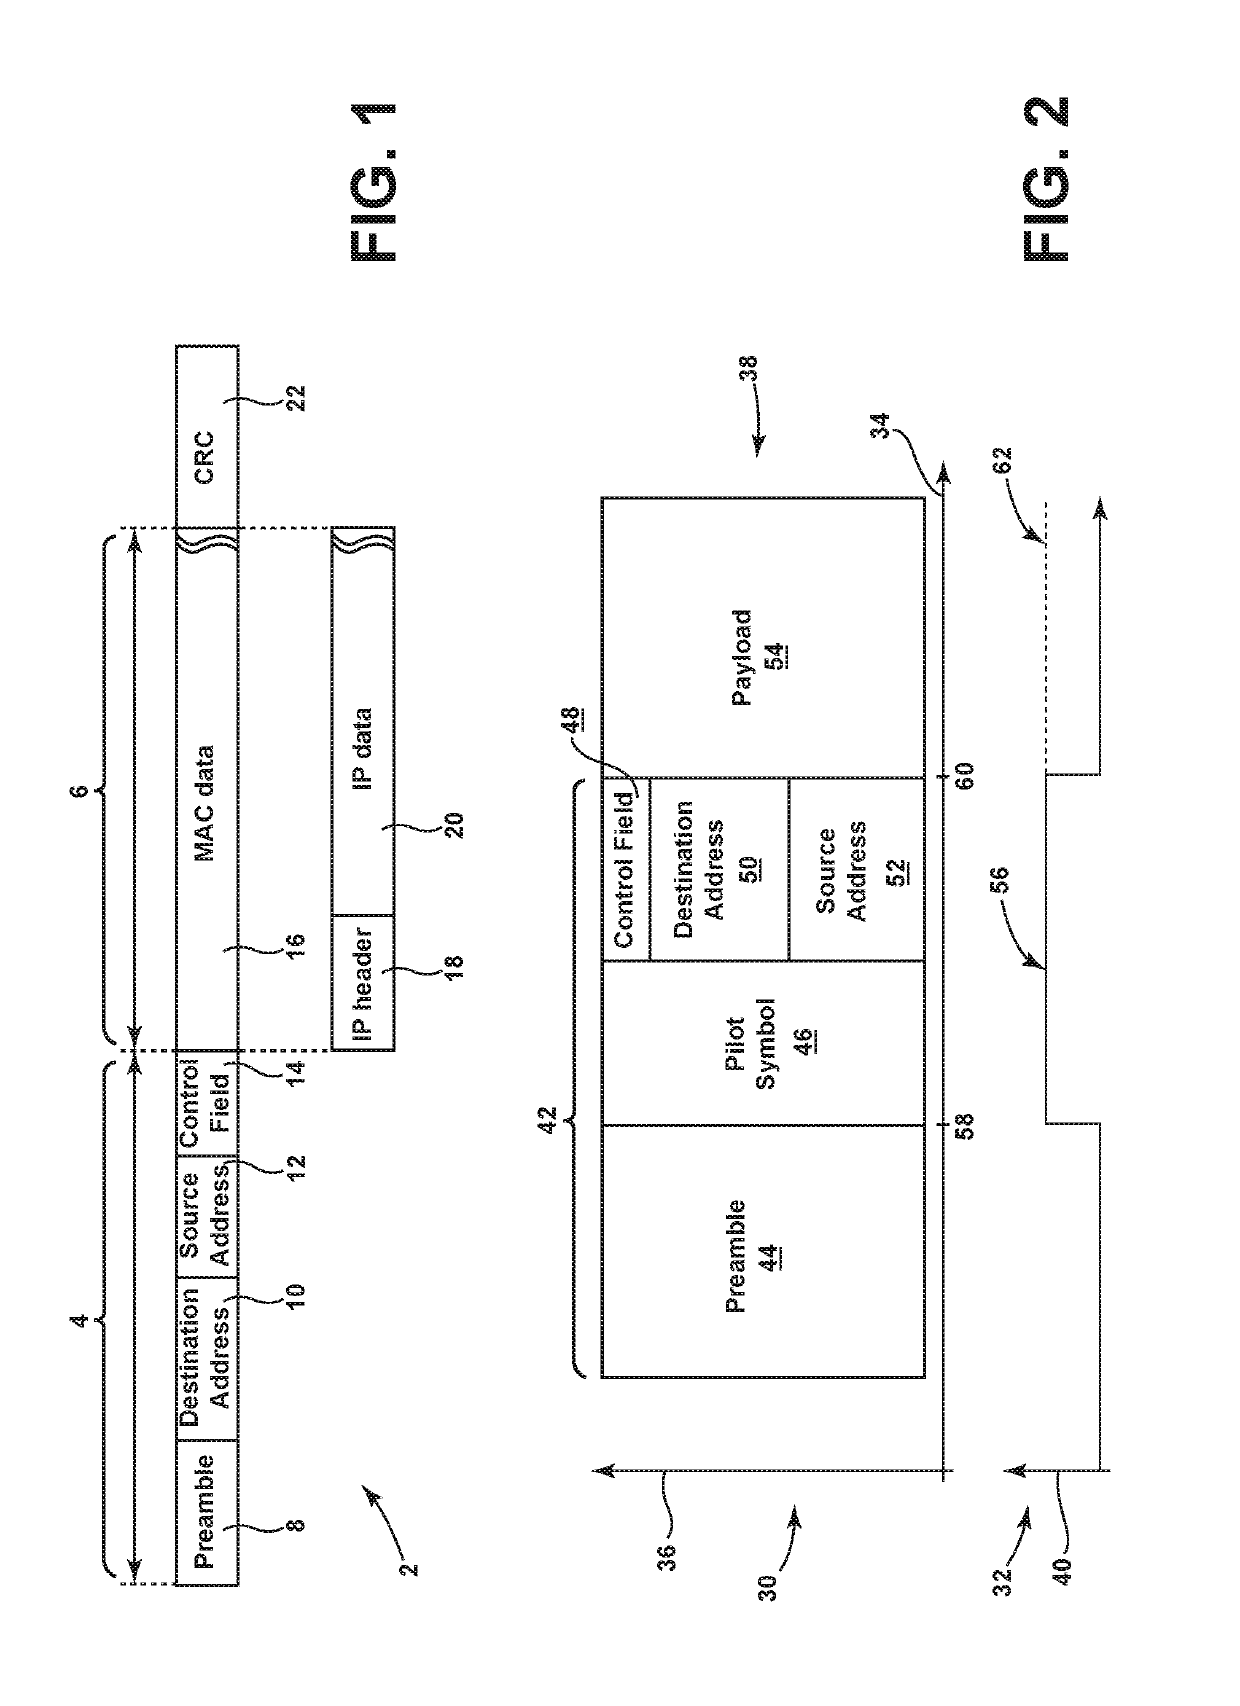 Method for processing a data packet